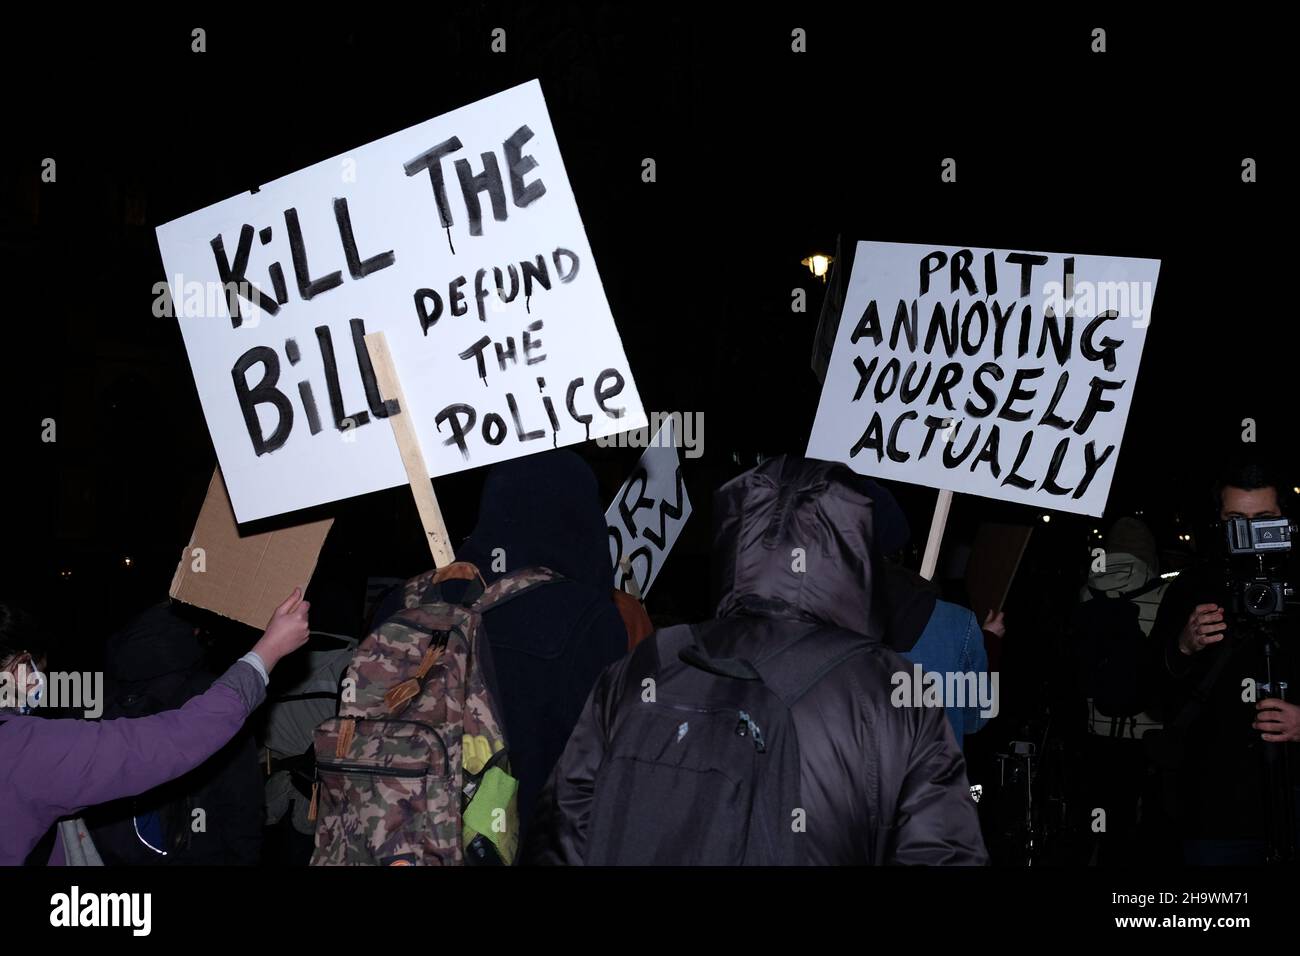 London, UK, 8th Dec, 2021, 'Kill the Bill' protesters hold up placards in Westminster as the third reading of the Police, Crime, Sentencing and Courts Bill (PCSC) got underway in the House of Lords. The new legislation, if passed, will grant police additional powers to crack-down on protest by allowing stop-and-search, data sharing of activists details and the breaking-up of demonstrations deemed as causing 'serious annoyance'. Campaigners say the bill will also criminalise the Gypsy, Roma and Traveller communities way of life. Credit: Eleventh Hour Photography/Alamy Live News Stock Photo